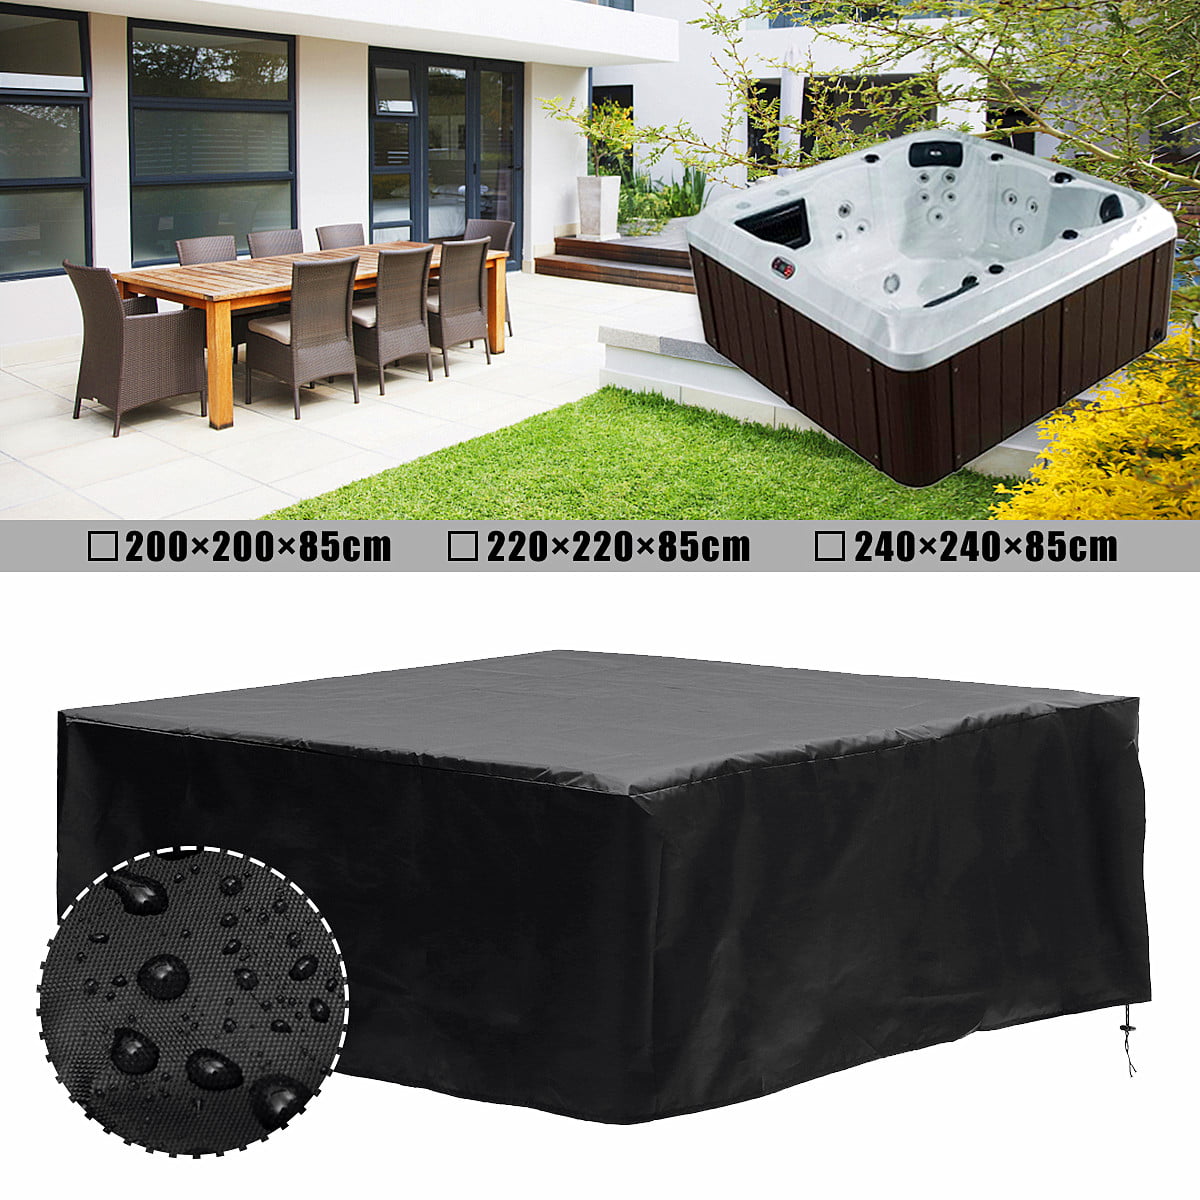 Square Hot Tub Cover Spa Covers Cap Waterproof Protector Black Polyethylene Square Waterproof Hot Tub Spa Cover Durable Protector Guard Dust Cap Dust-Proof Thermal Insulation Cover